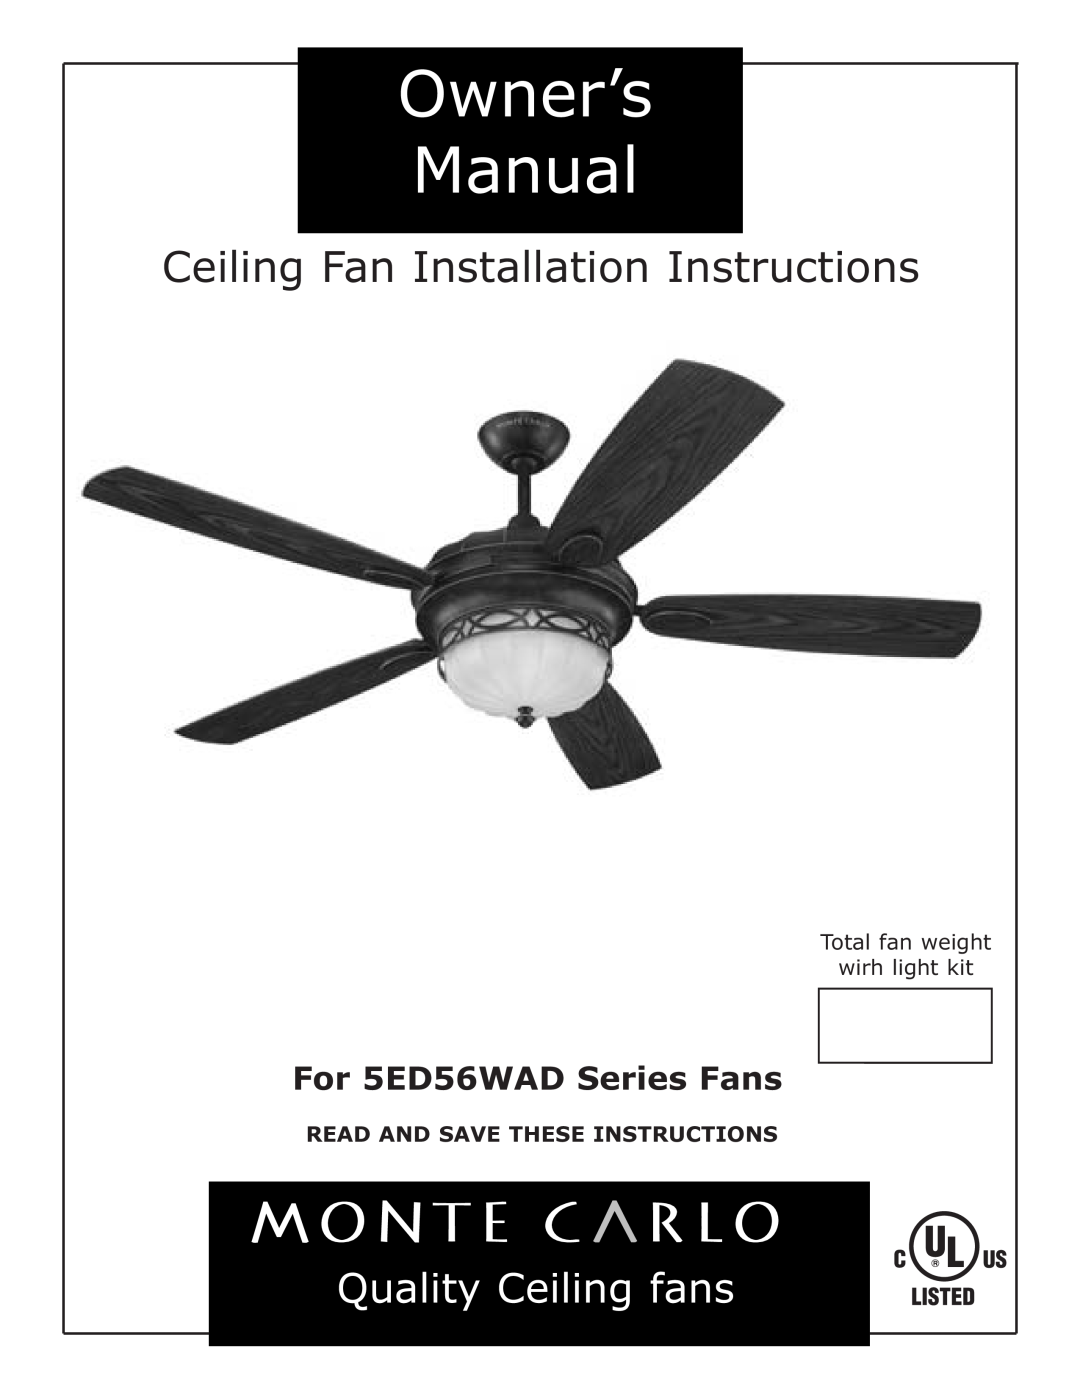 Monte Carlo Fan Company 5ED56WAD Series owner manual Ceiling Fan Installation Instructions, Quality Ceiling fans 